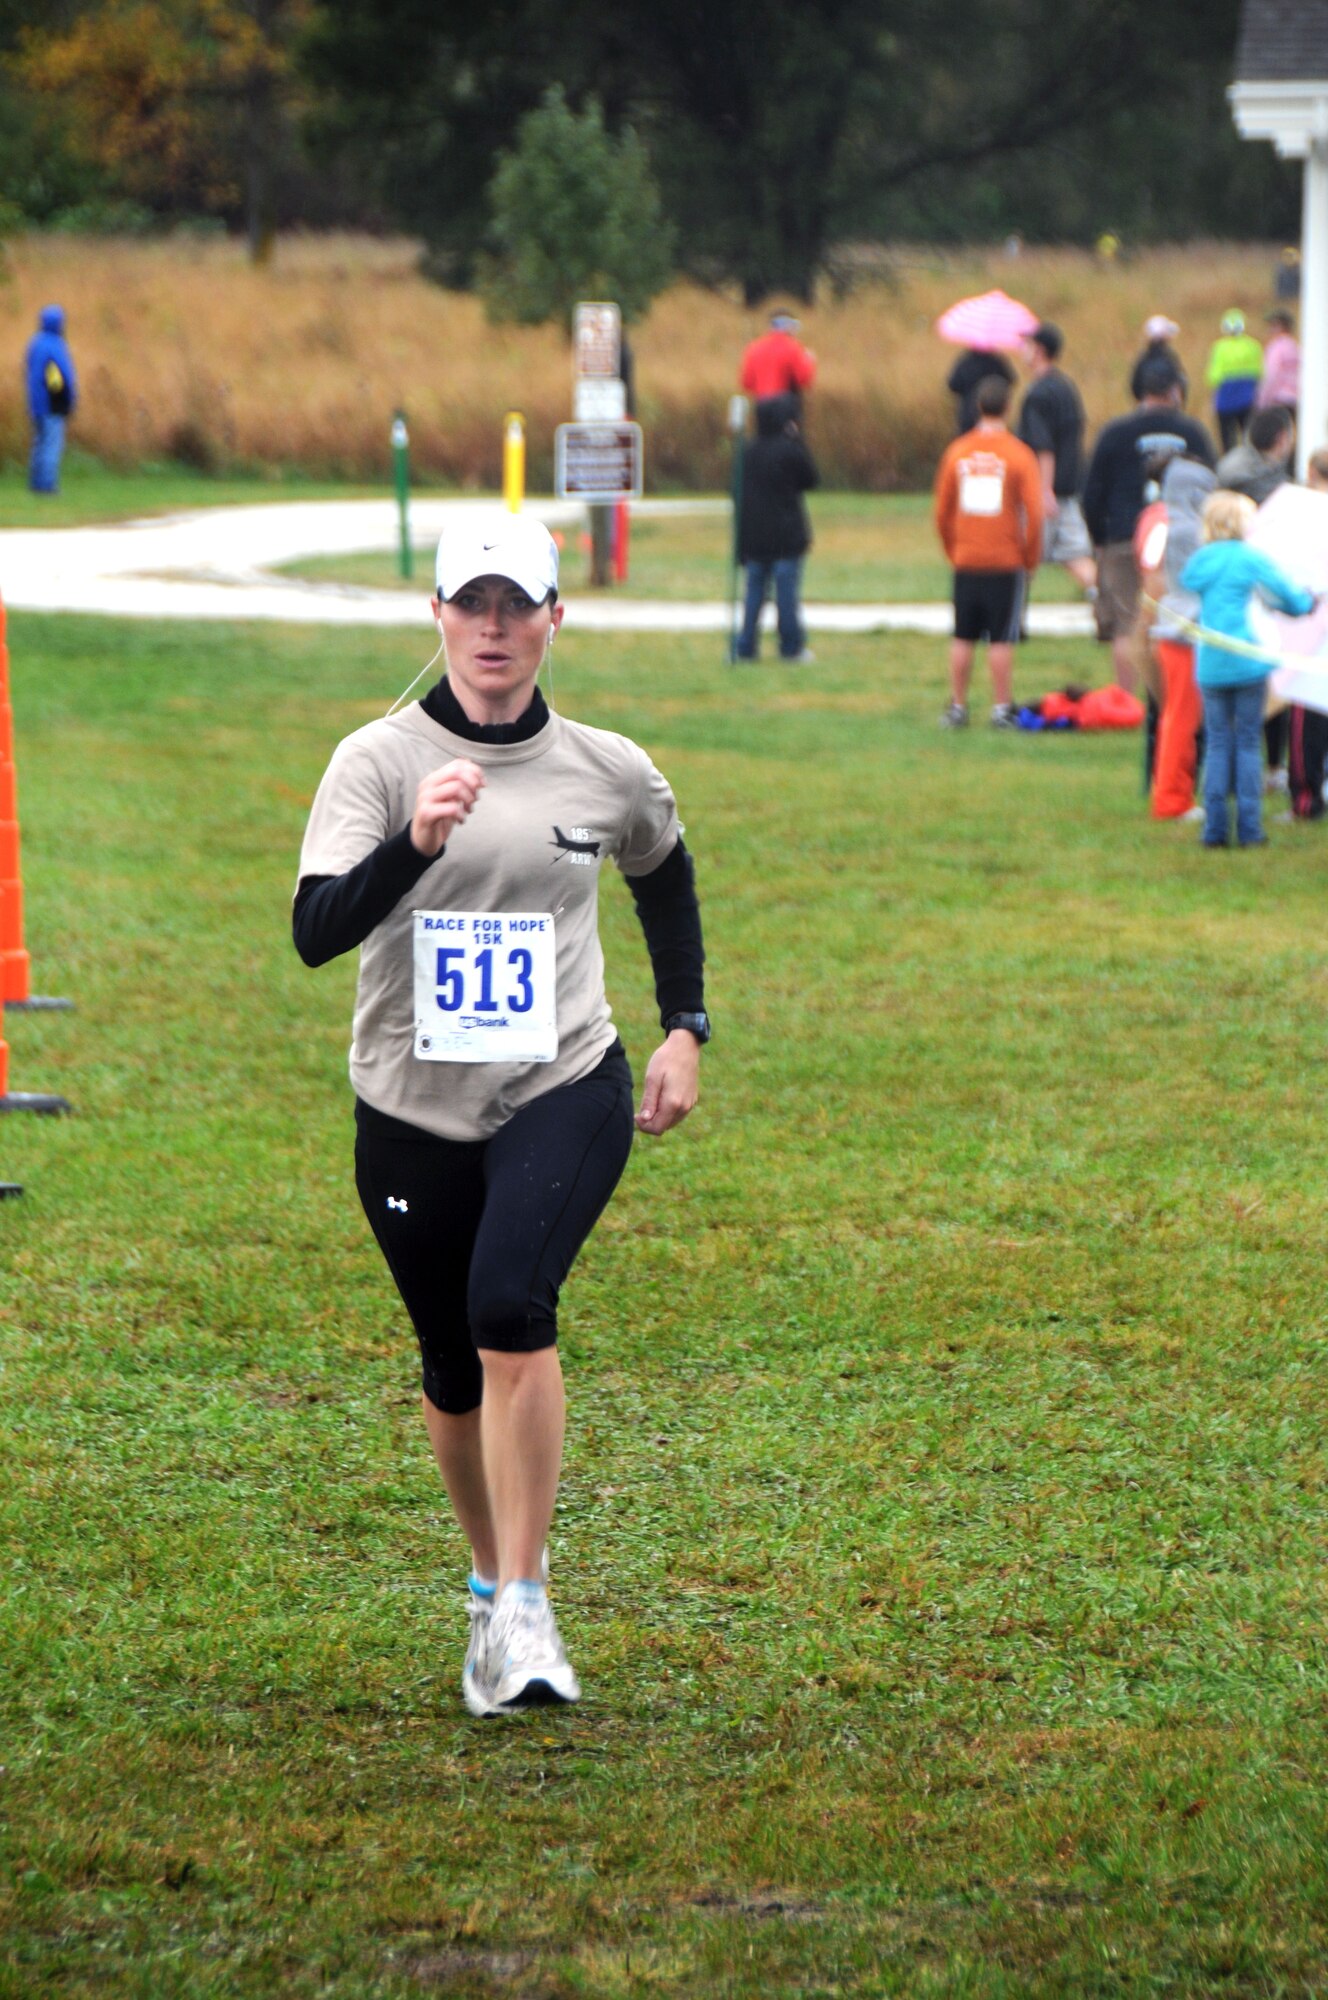 Second Lieutenant Jennifer Carlson, 185th Air Refueling Wing (ARW), Equal Opportunity, Sioux City, Iowa, finishes the 15K portion of the June E. Nylan Run for Hope held at the Adams Nature Preserve in McCook Lake, SD. The 185 ARW is the honorary ambassador for this year's event.